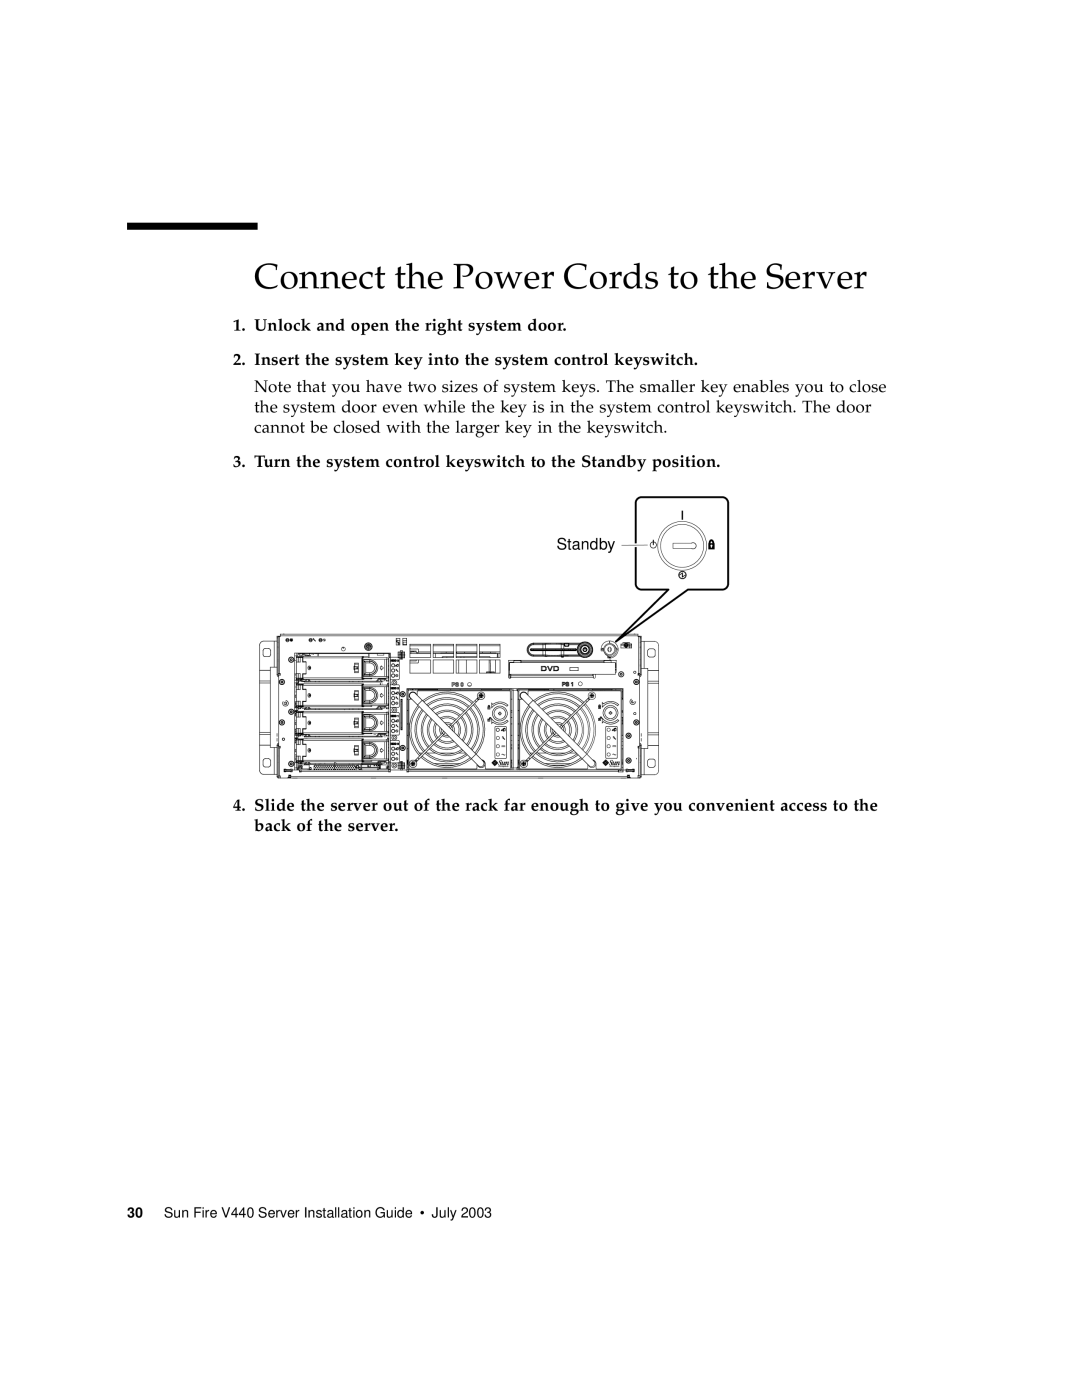 Sun Microsystems 816-7727-10 manual Connect the Power Cords to the Server 